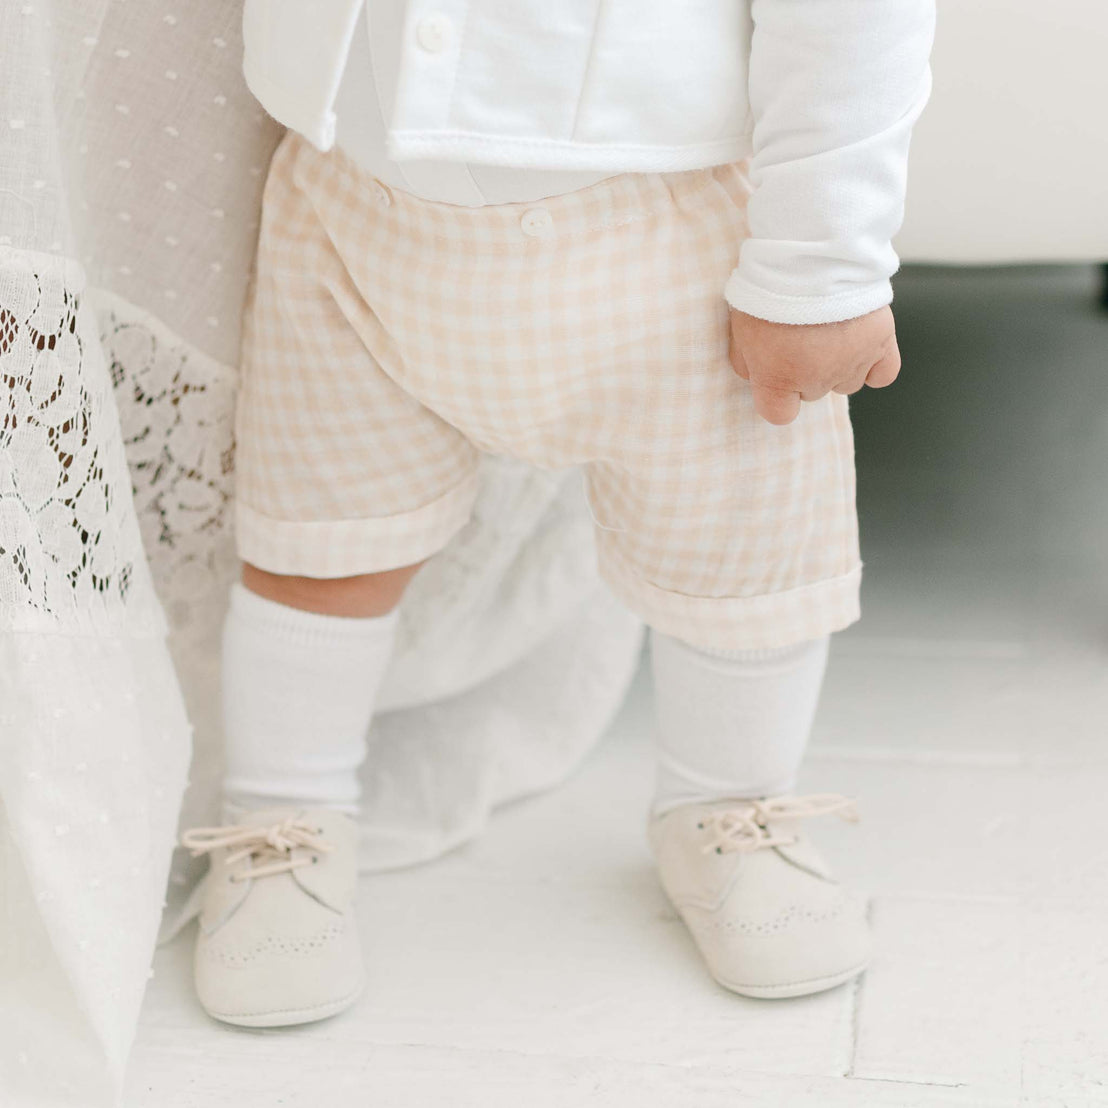 A toddler in traditional beige checkered shorts and Ian Suede Shoes stands next to a lace curtain, focusing on their tiny feet and hands.